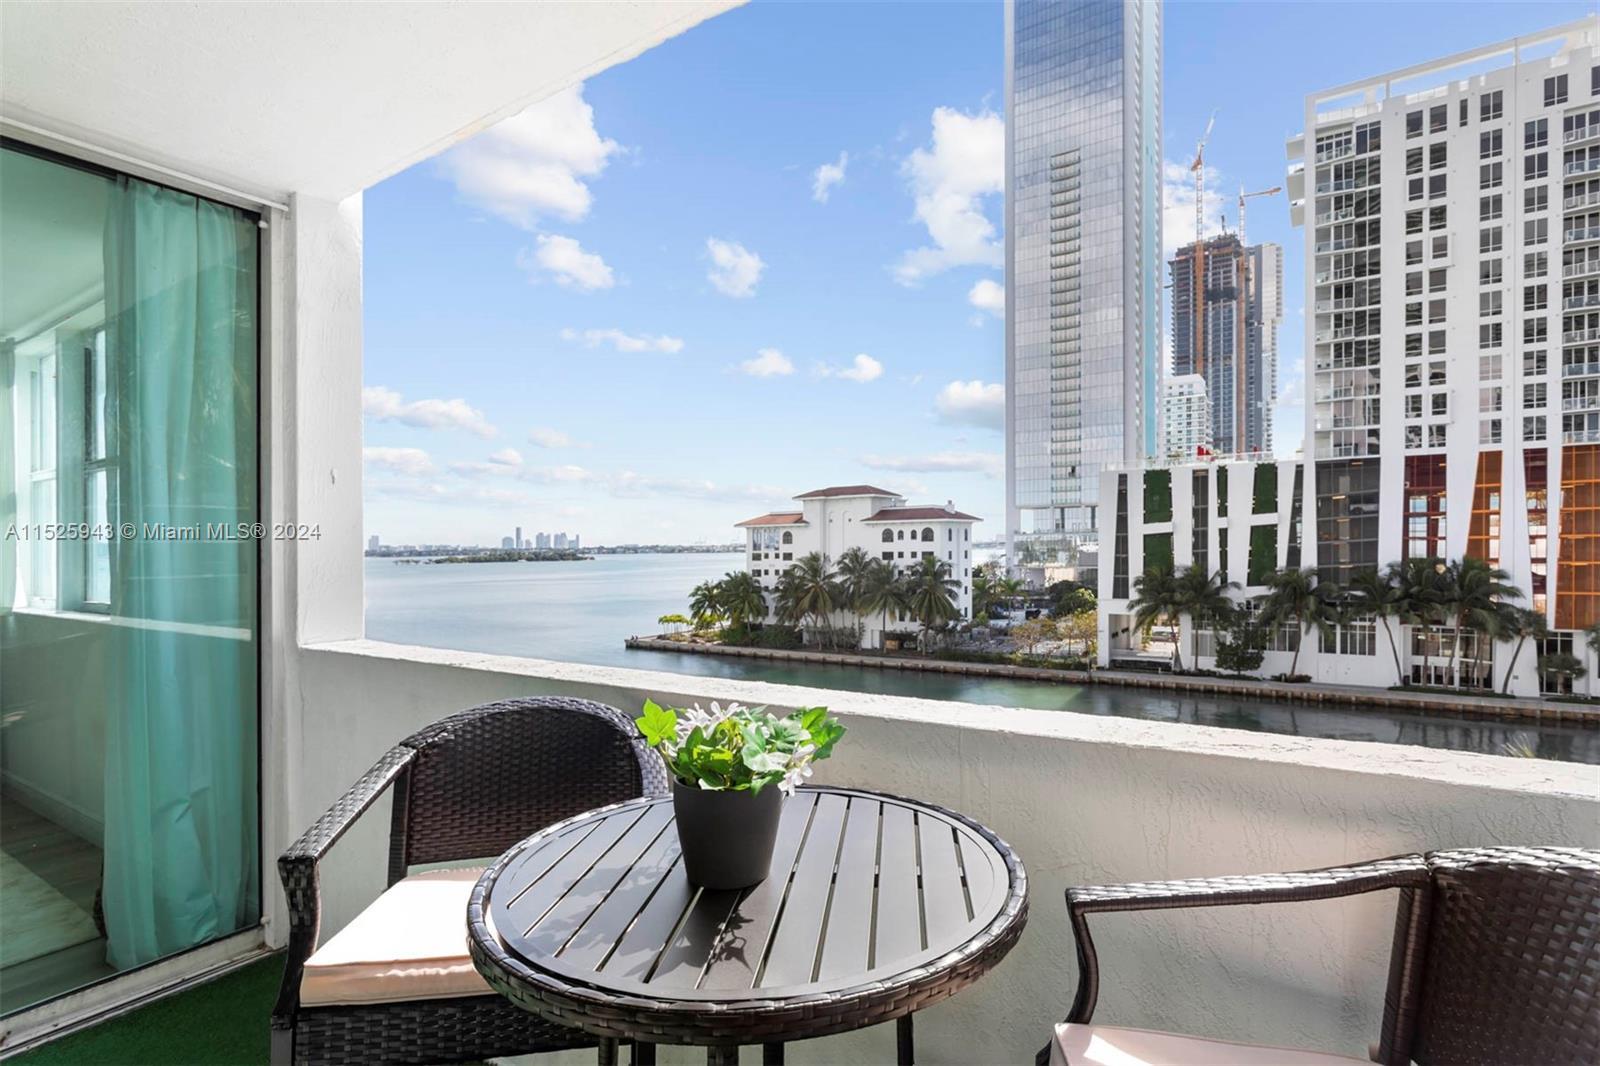 Elegant 1 bedroom, 1 bathroom residence, offering breathtaking bay views and spacious balcony. The m